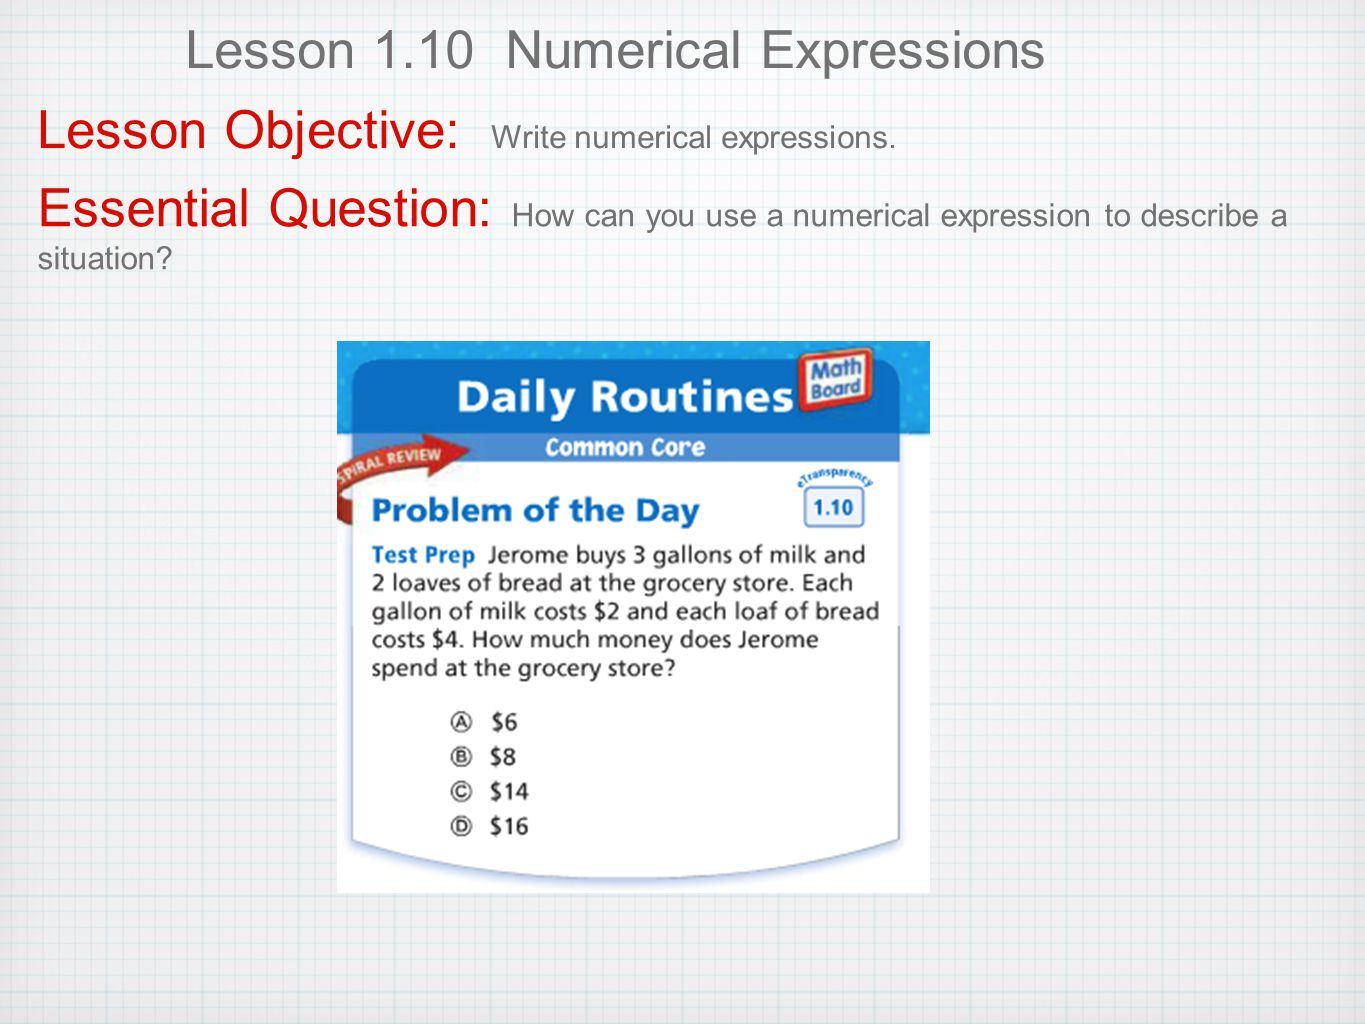 Lesson 1.10 Numerical Expressions